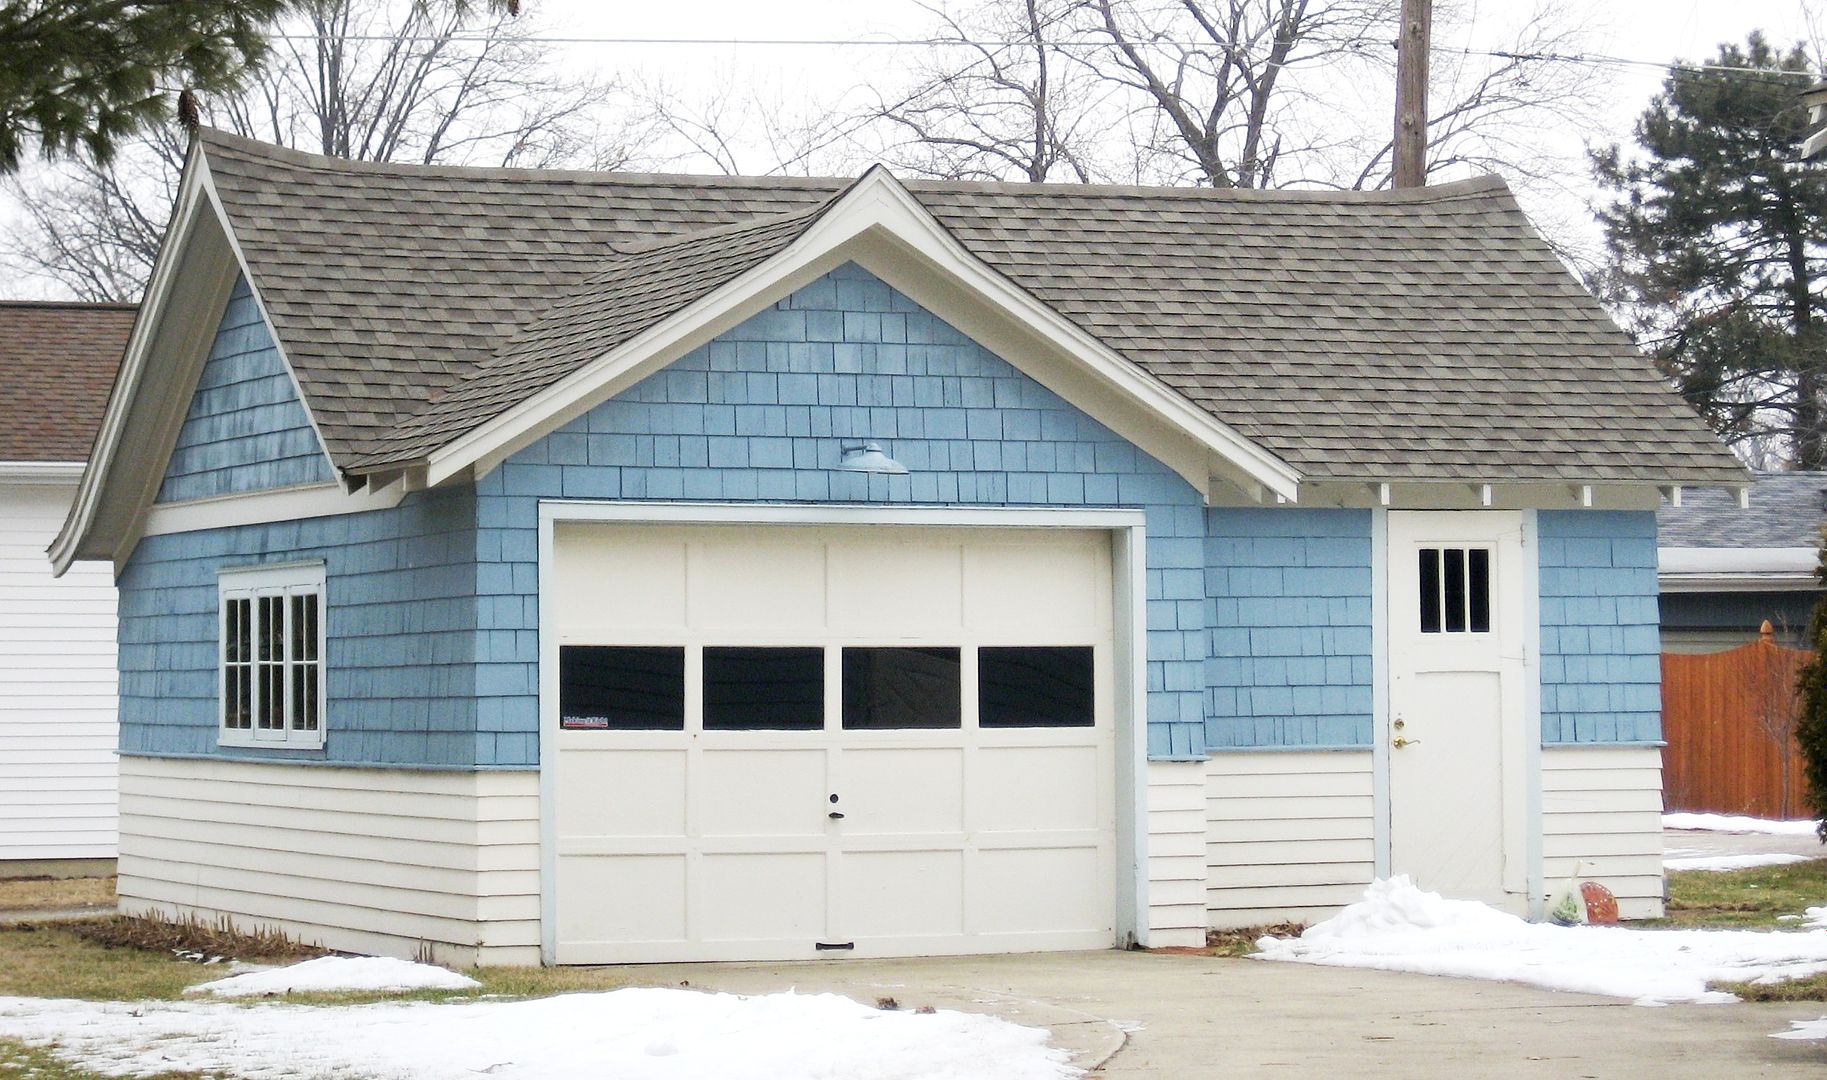 And God bless these dear owners who had this garage custom-built to match their beautiful Osborn. Sears didnt offer this design in their catalogs, but it sure is a nice match to the original Sears House!